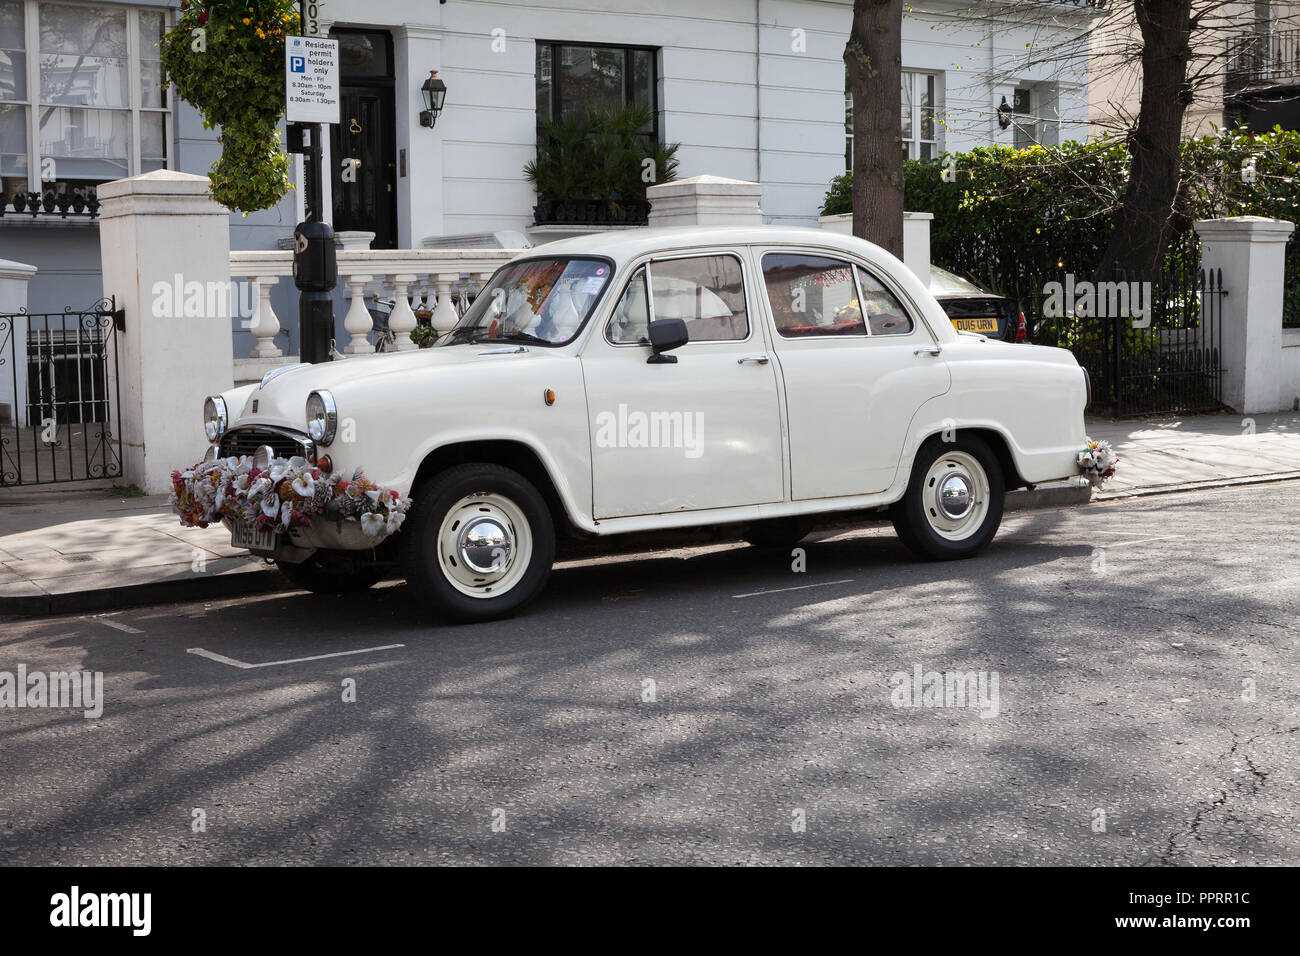 Ambassador car decorated with flowers parked in the Notting Hill area of London Stock Photo